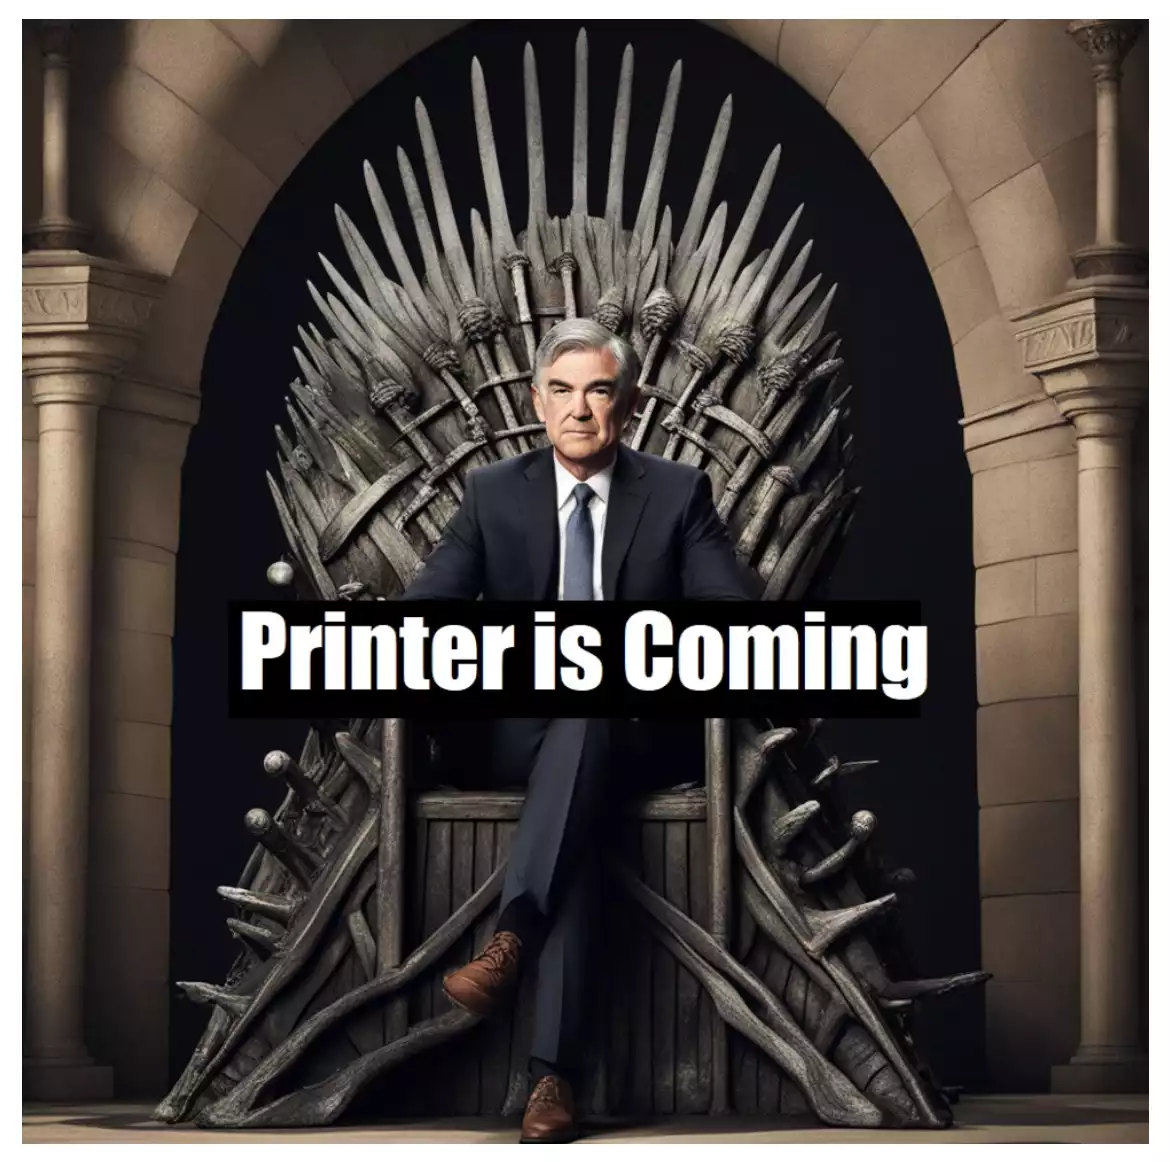 Printer is coming text and Throne of Swords